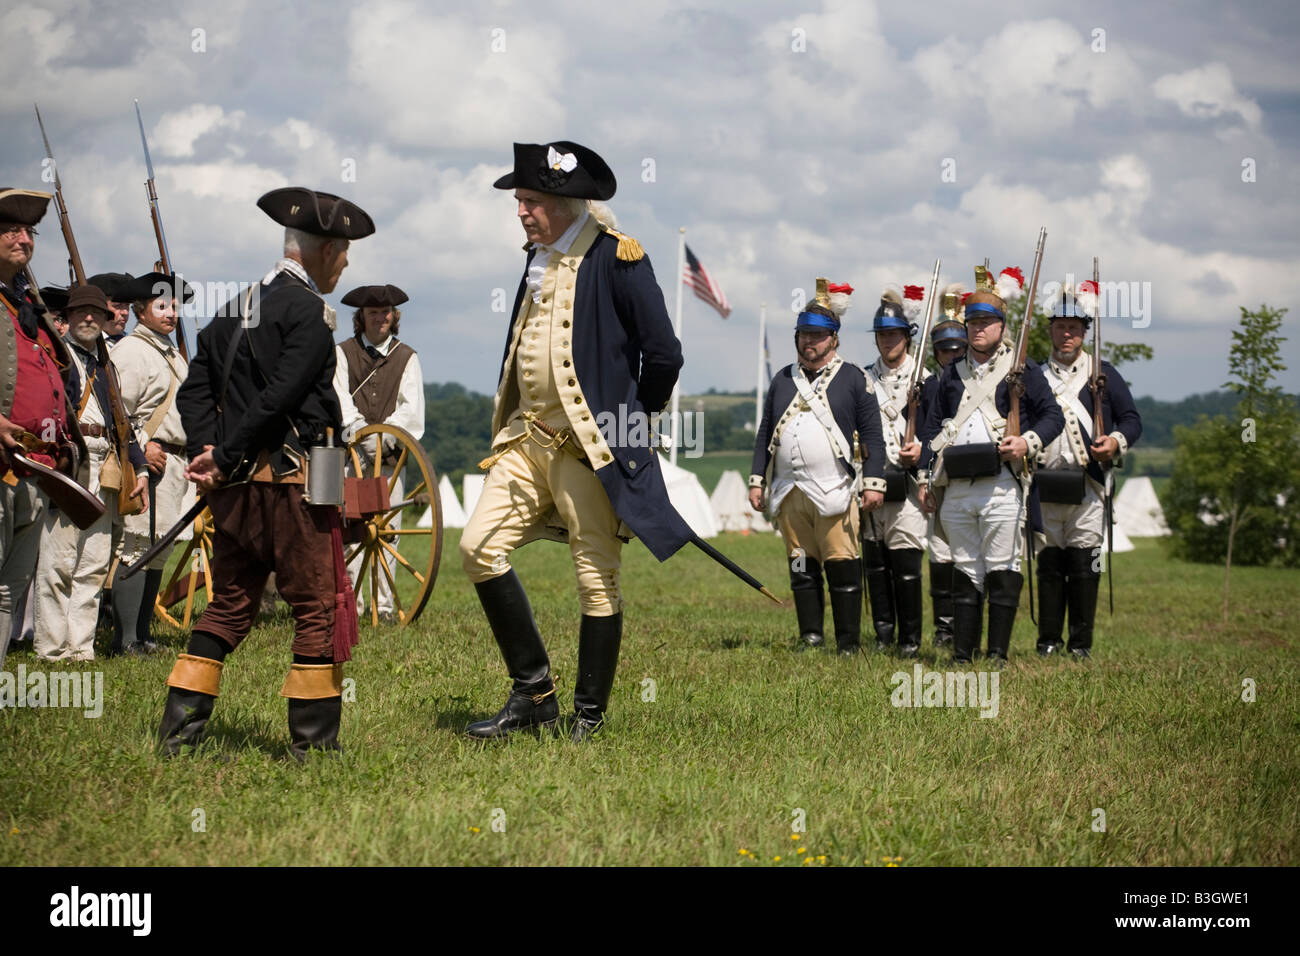 George Washington impersonator Dean Malissa inspecting troops at Revolutionary War reenactment Mohawk Valley New York State Stock Photo